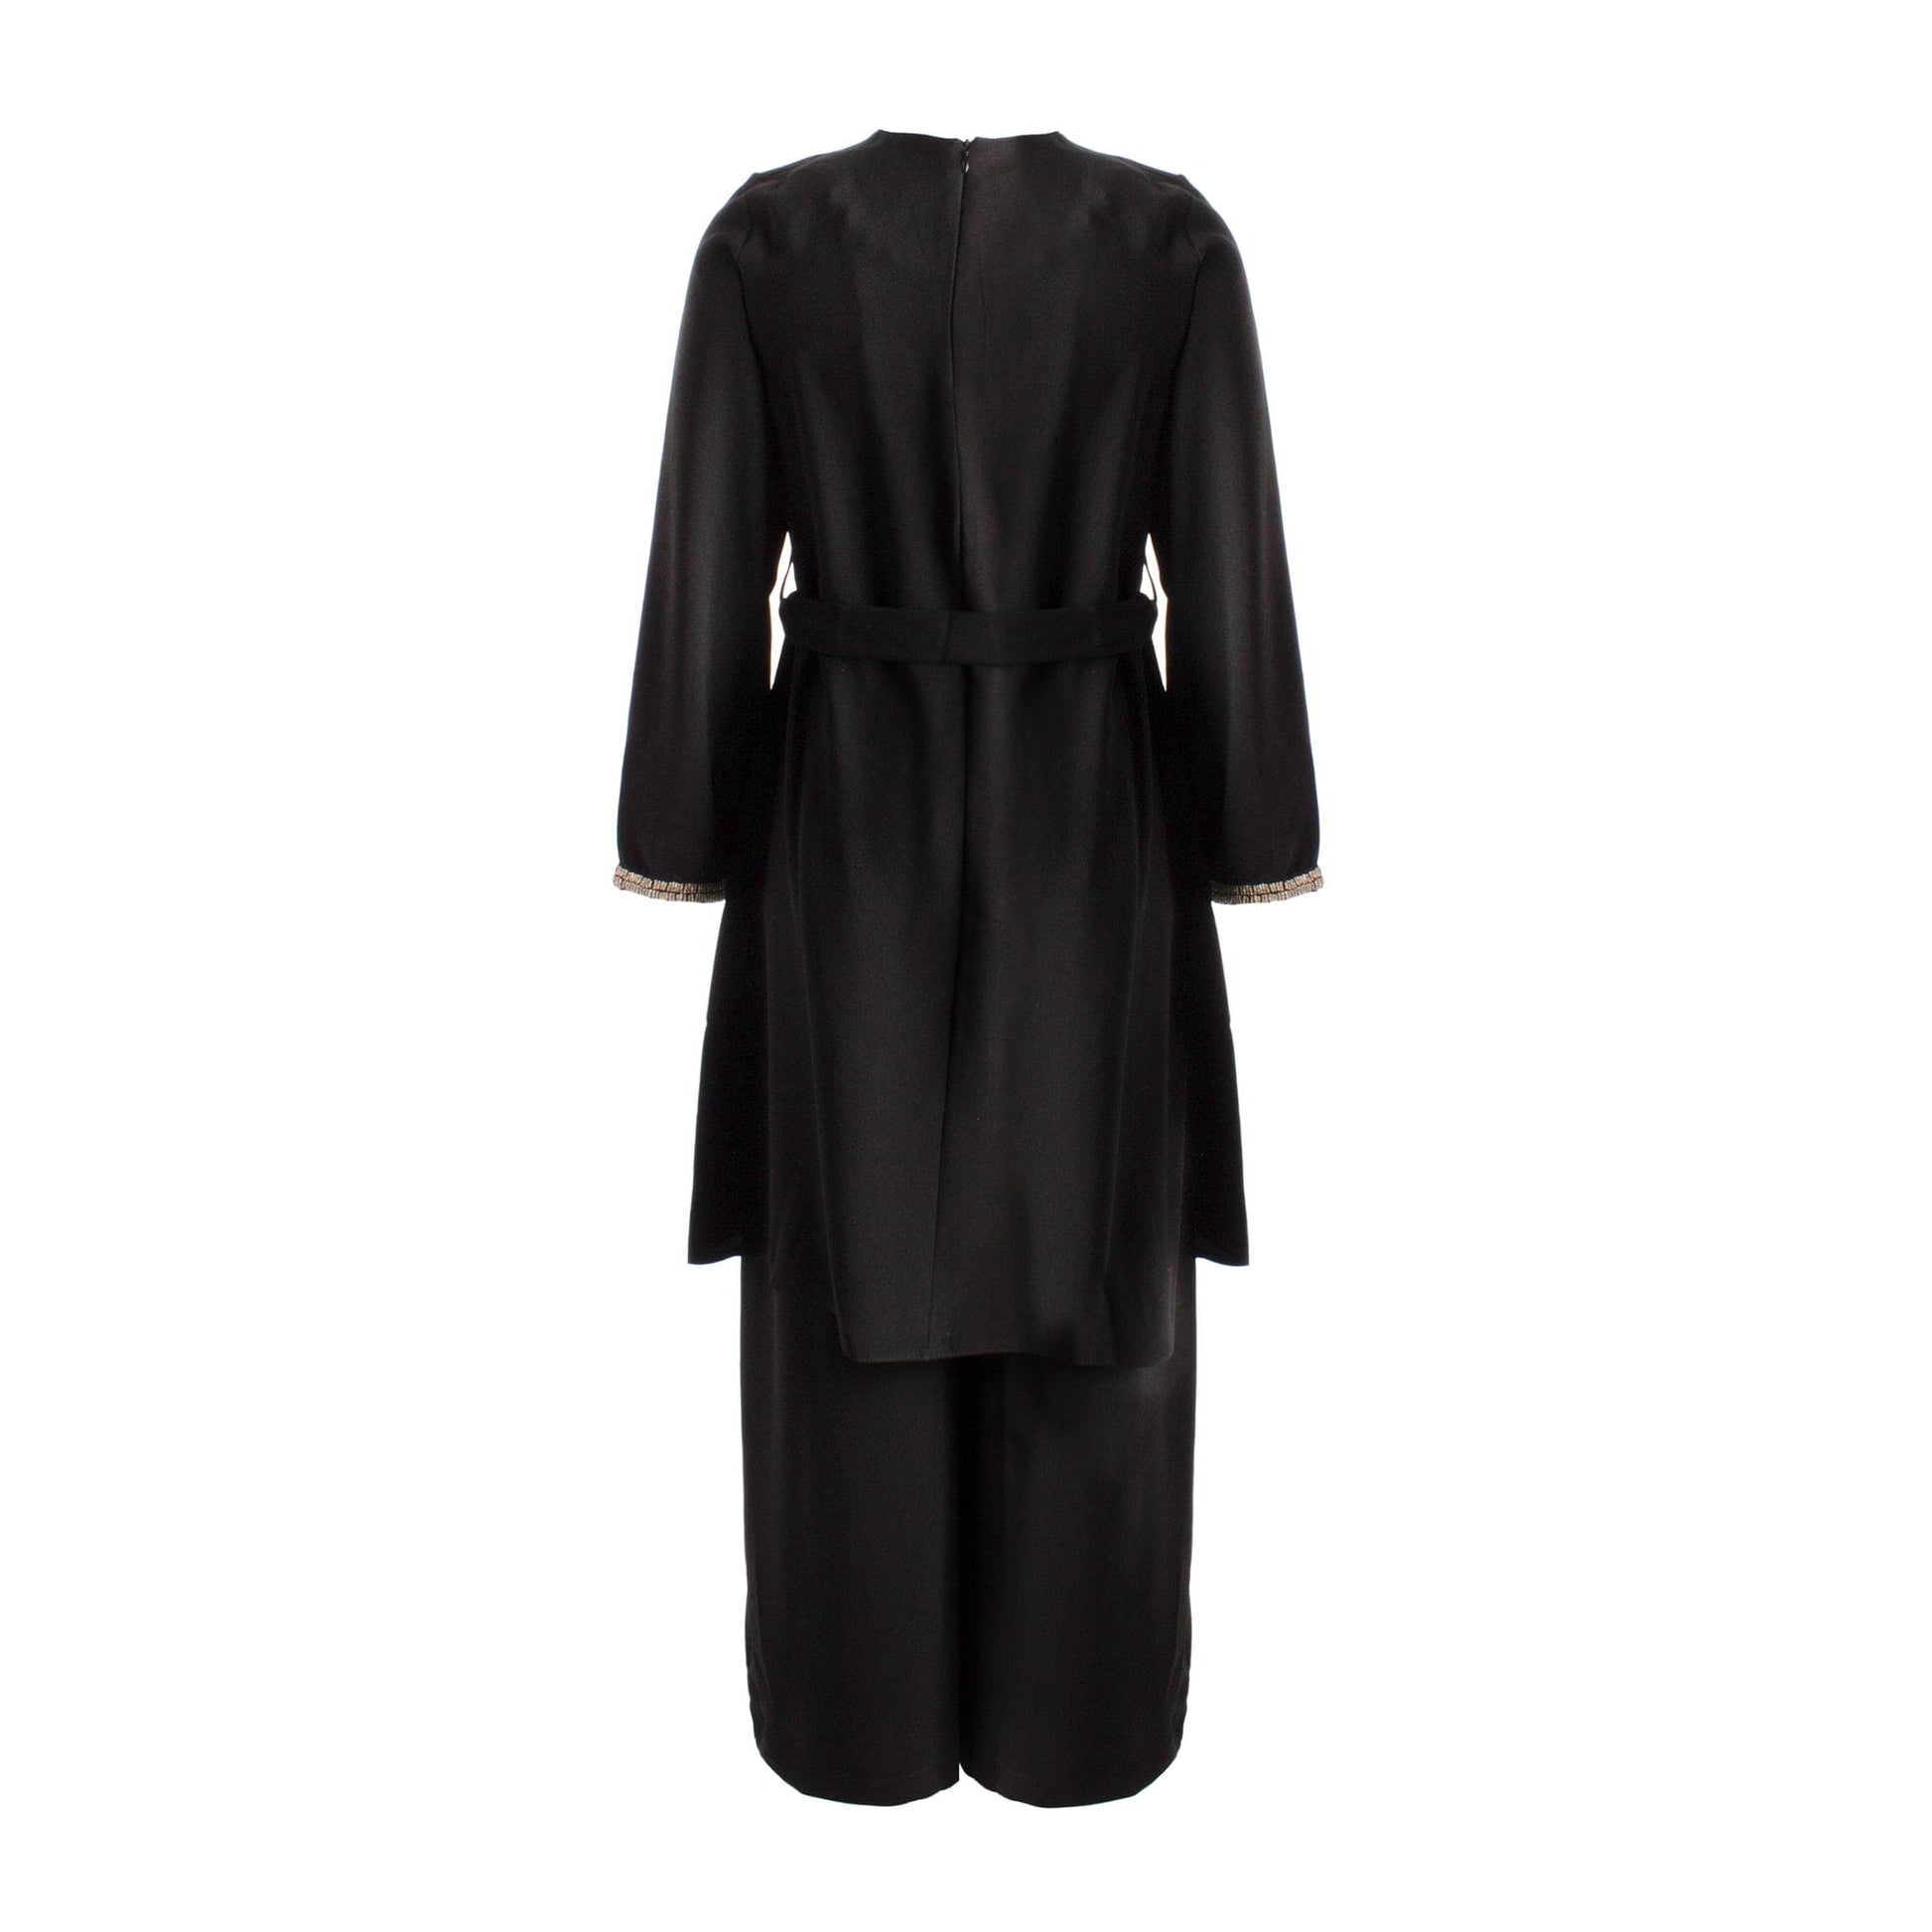 Upgrade your wardrobe with this elegant and modest black tunic and pants set from Jolie Nisa